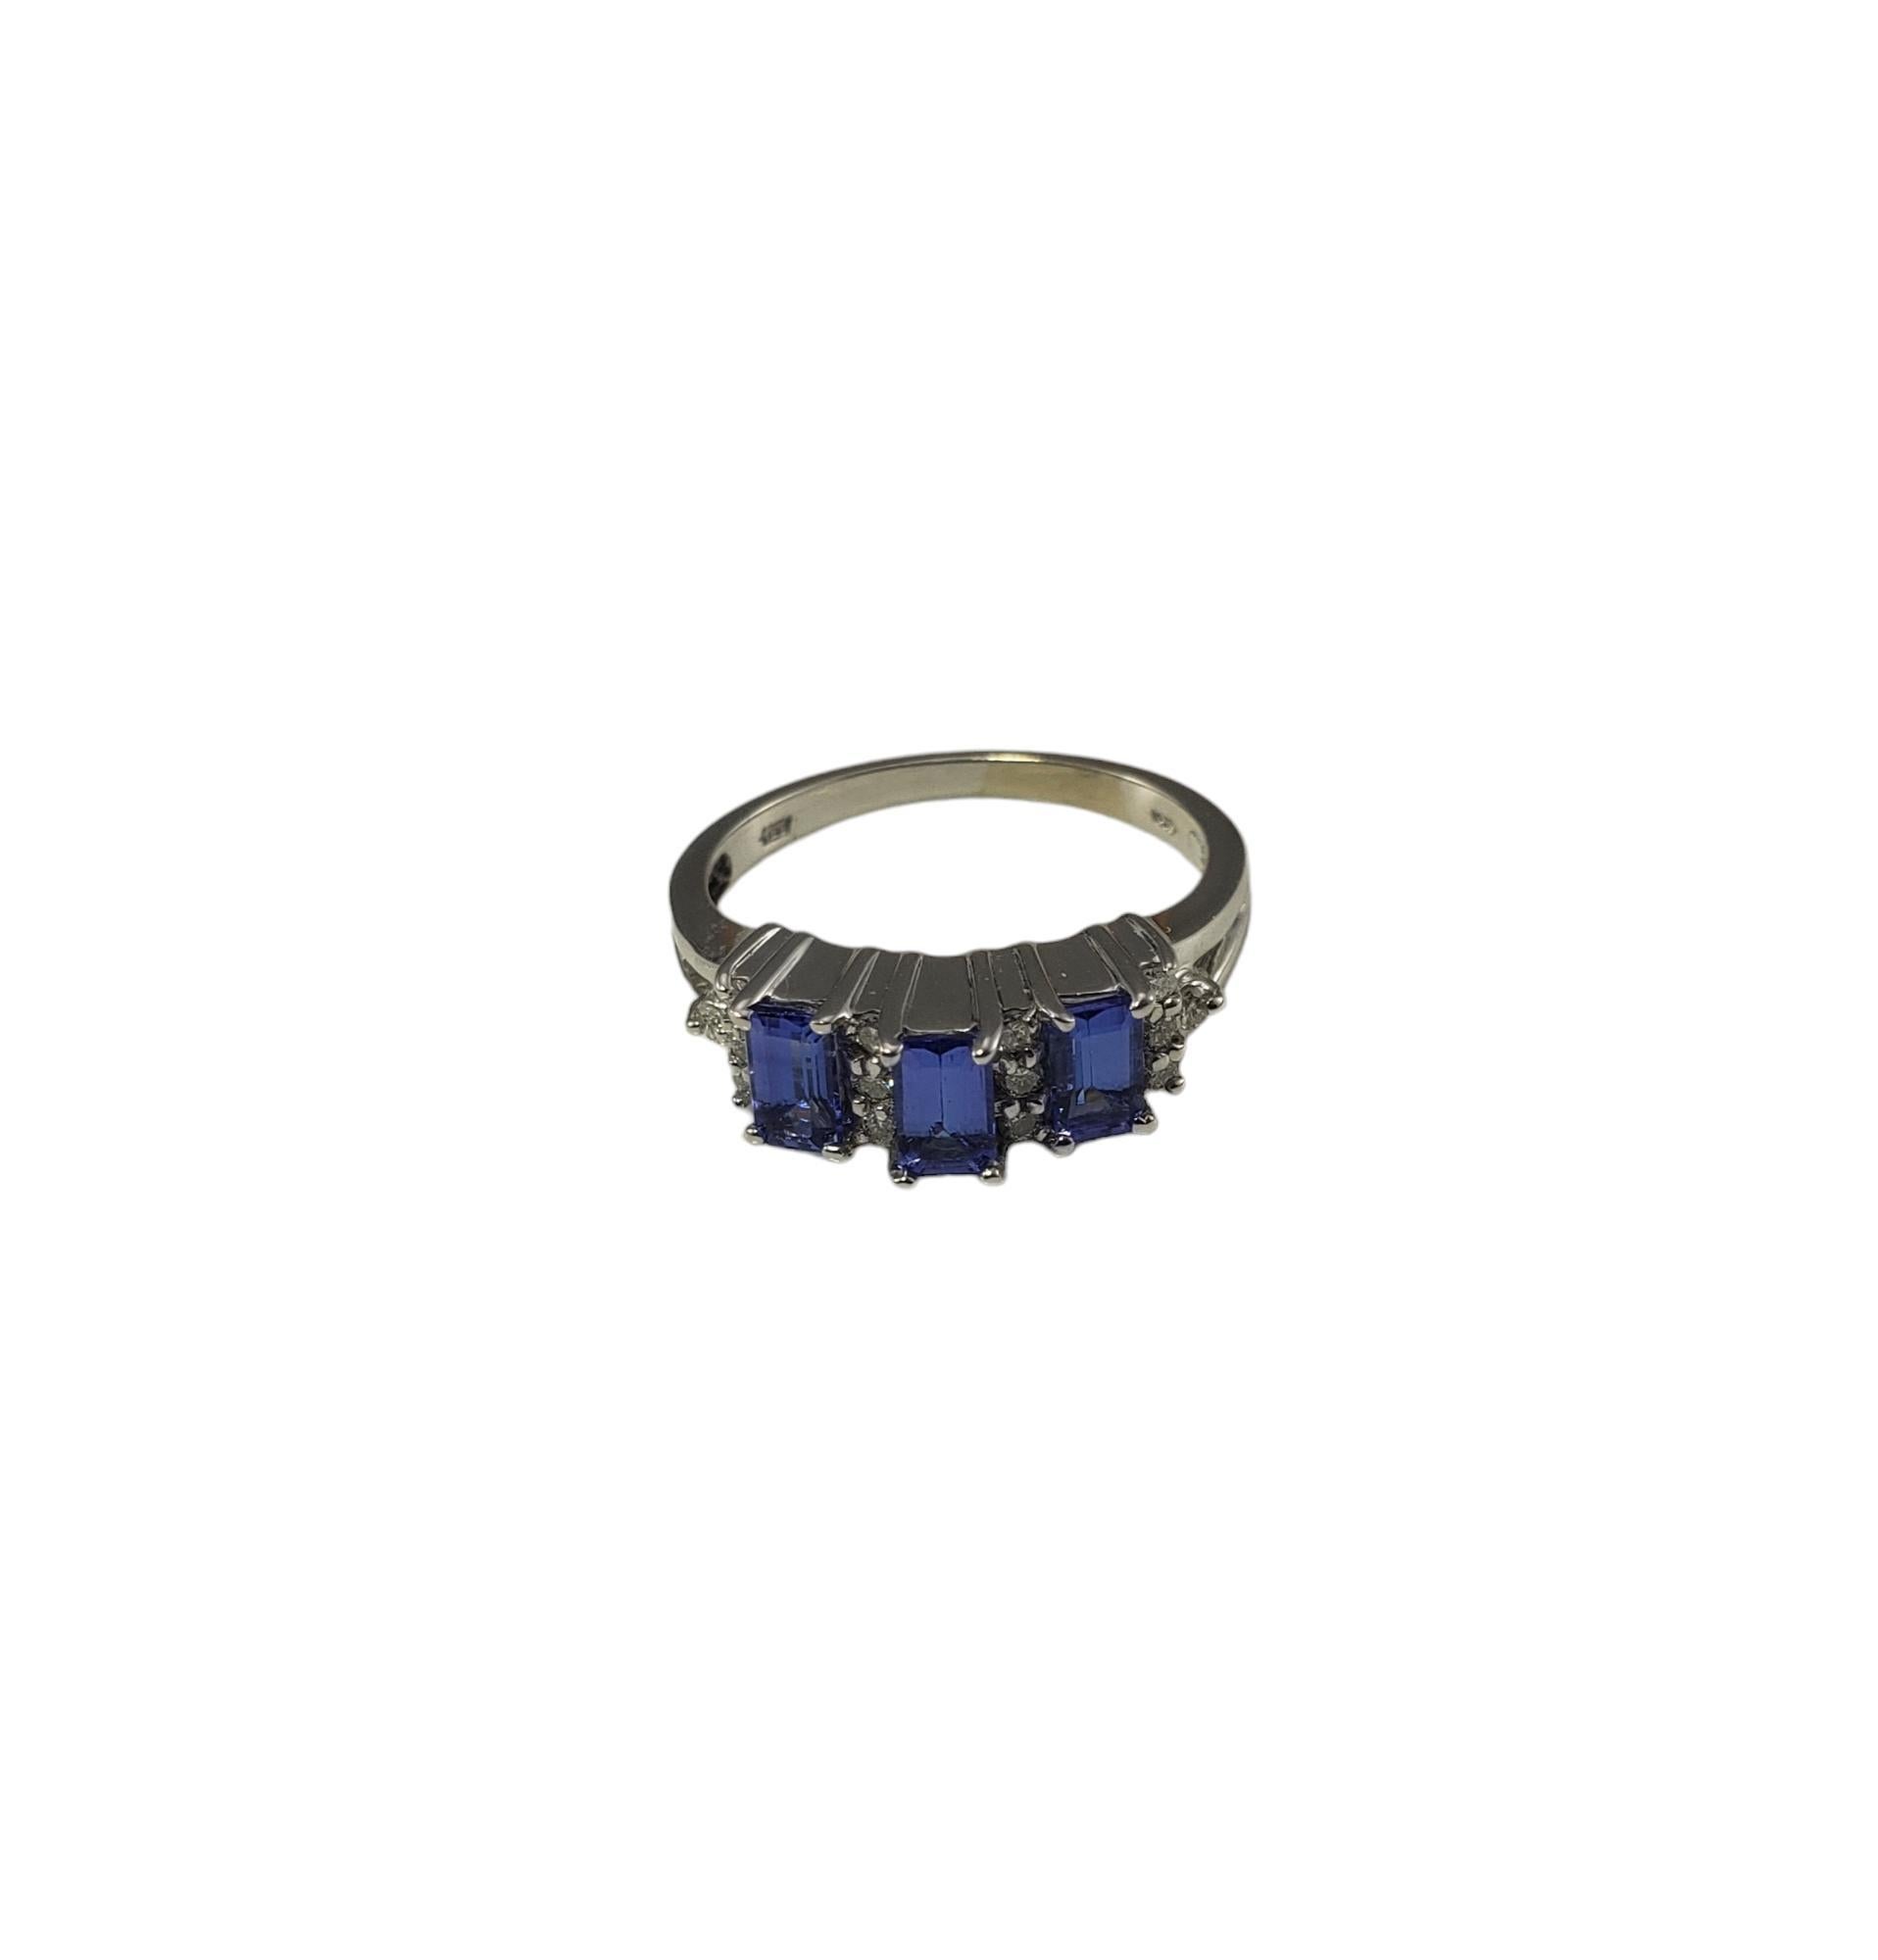 Vintage 14K White Gold Tanzanite and Diamond Ring Size 7 Certified-

This stunning ring features three emerald cut tanzanites (5 mm x 3 mm) and 14 round brilliant cut diamonds set in classic 14K white gold.  Width: 6 mm.  Shank: 2 mm.

Total